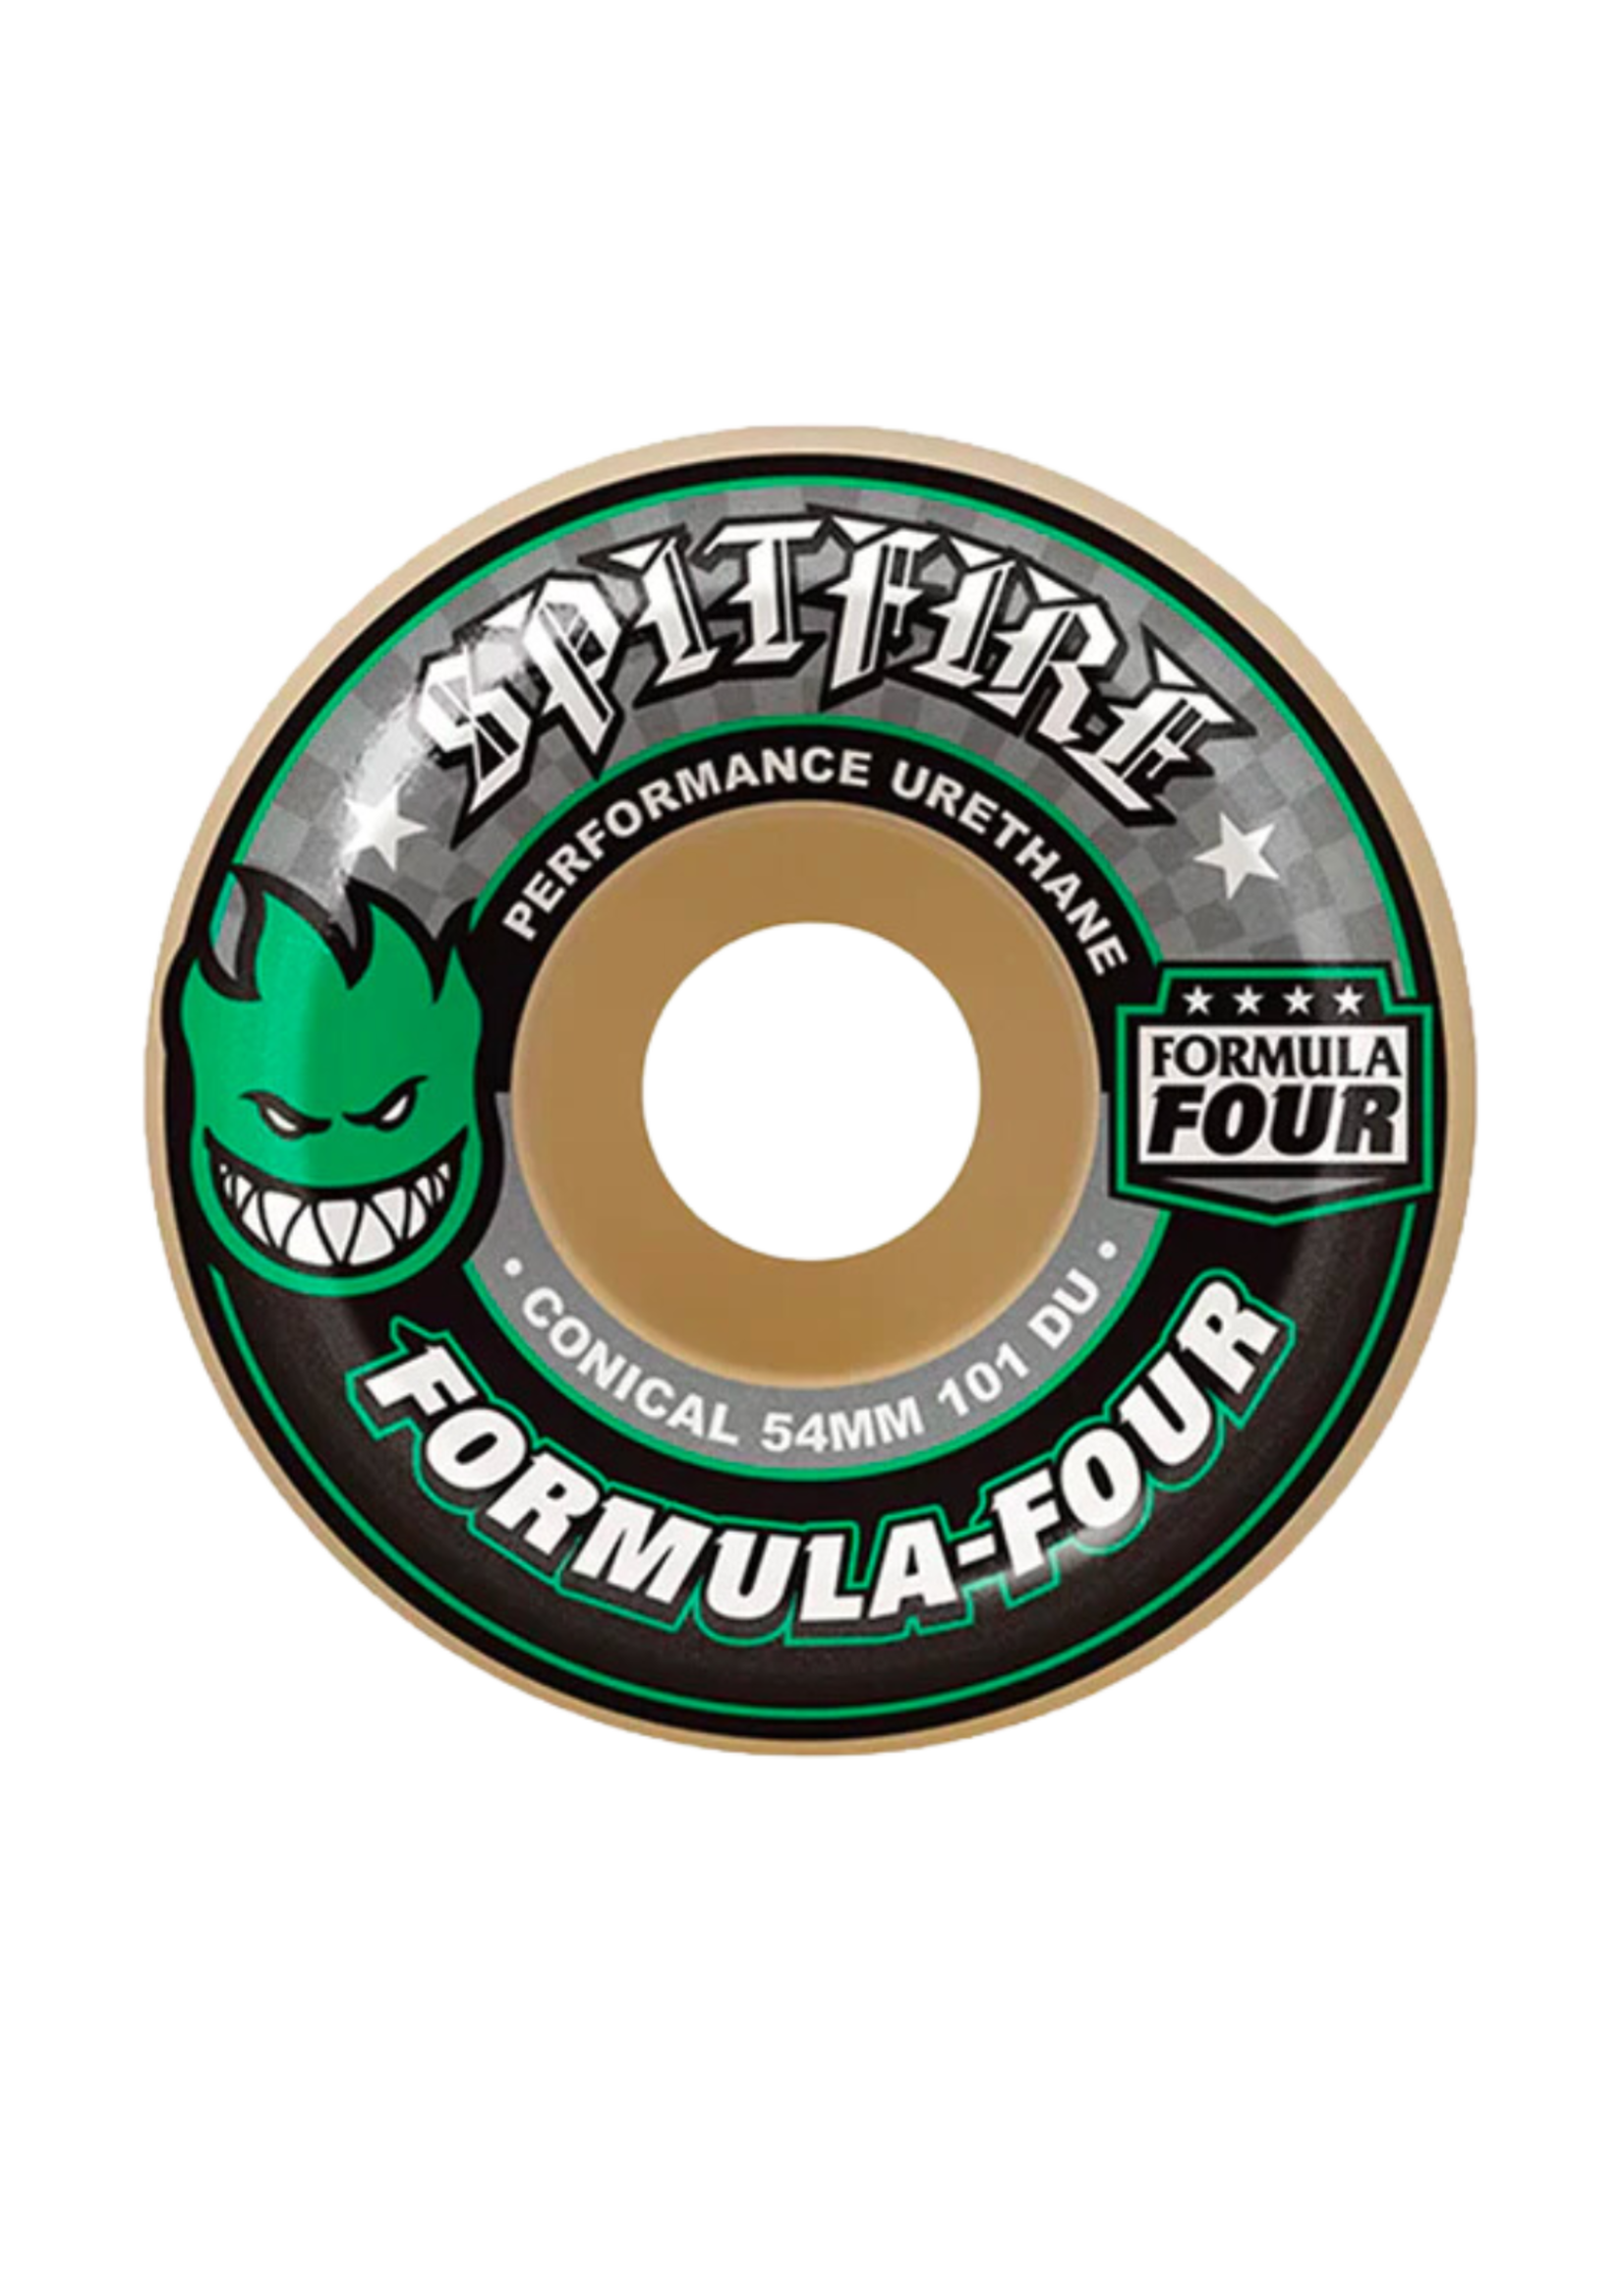 SPITFIRE CONICAL FULL F4 54, 56MM / 101A